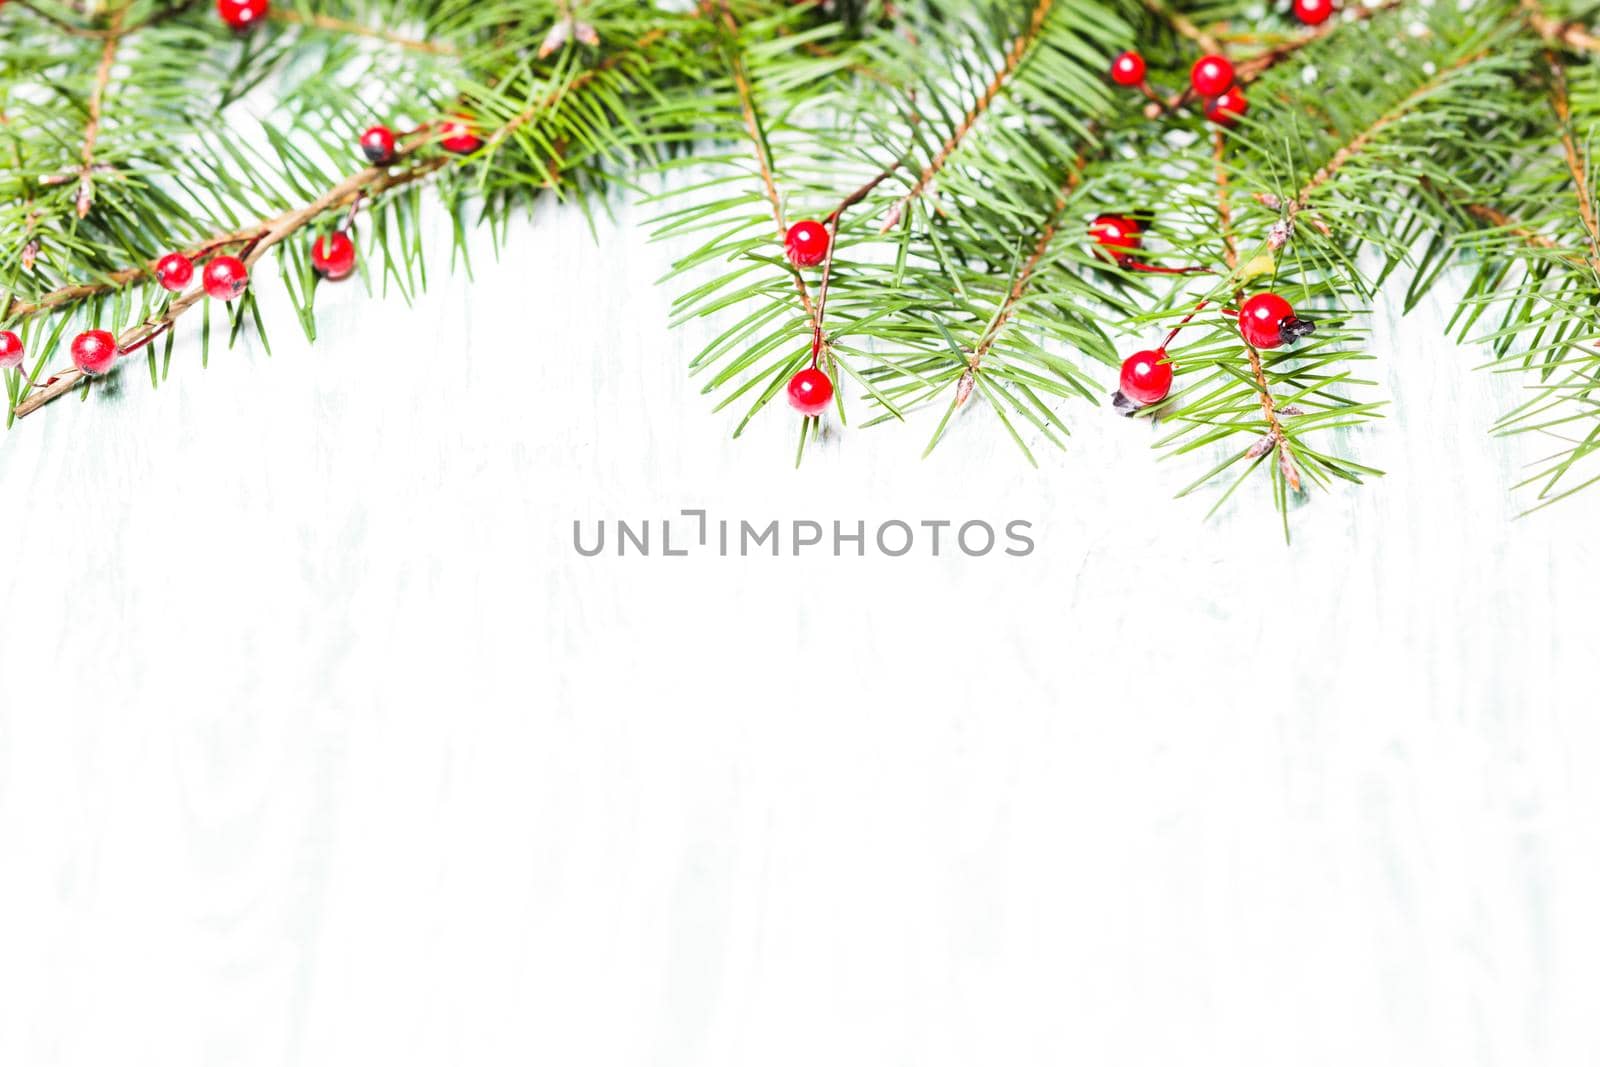 Fir brahcnes with holly berries on a wooden background. Copy text for Christmas greetings